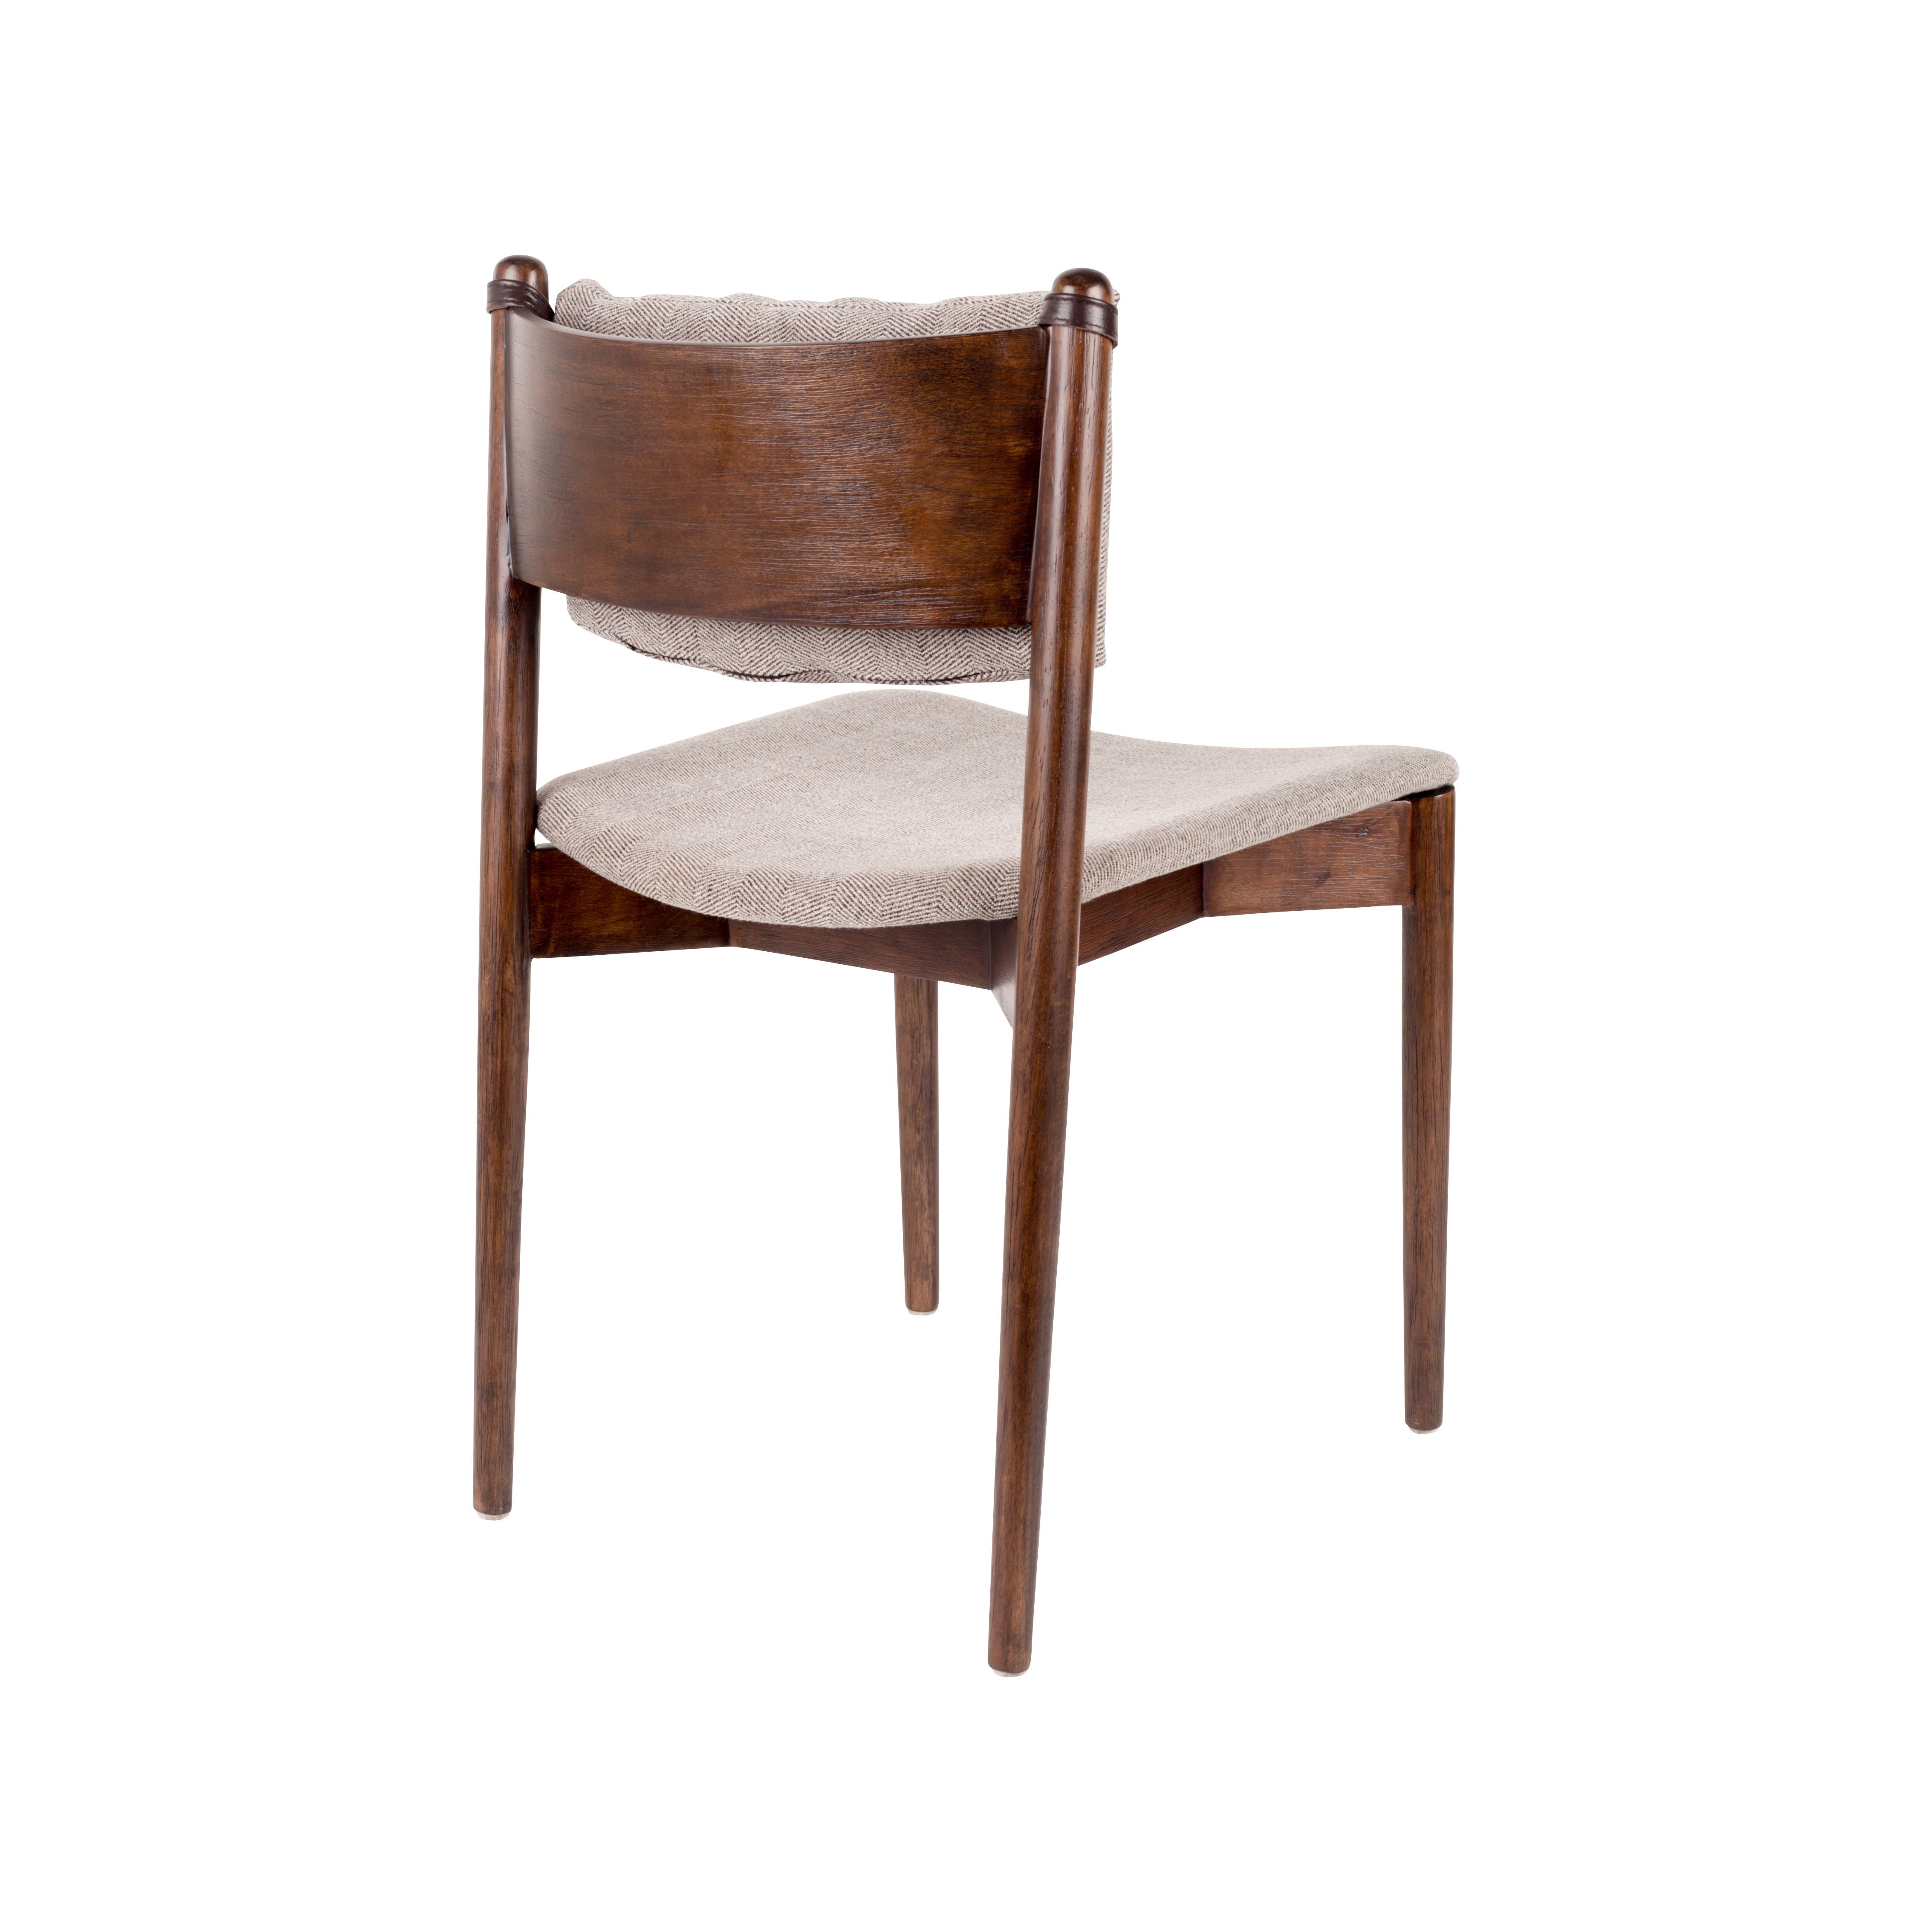 Chair torrance | 2 pieces